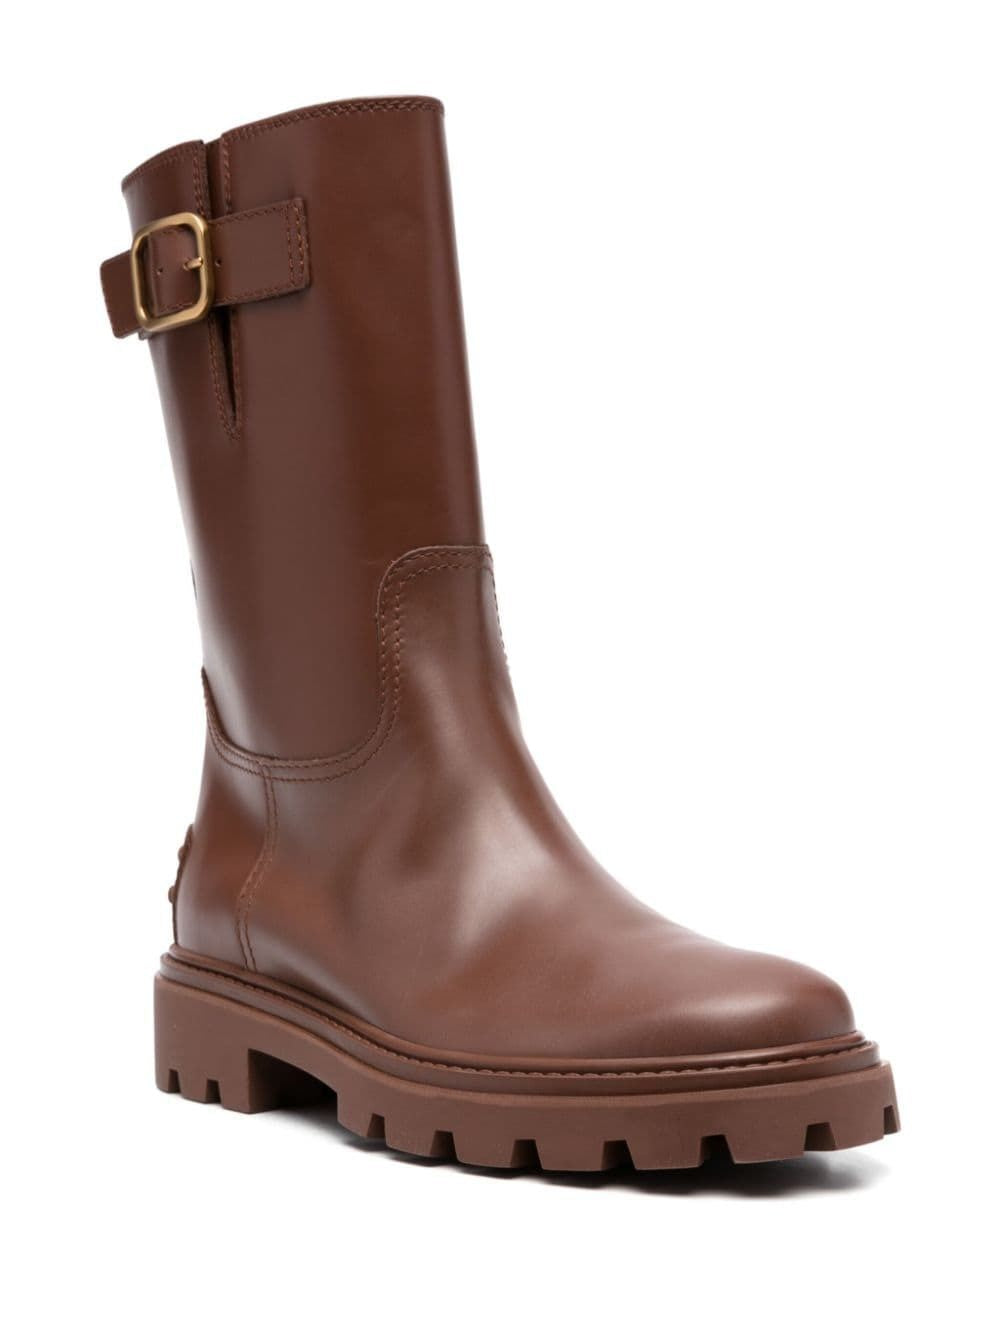 Stylish Buckle-Detail Leather Boots for Women in Brown